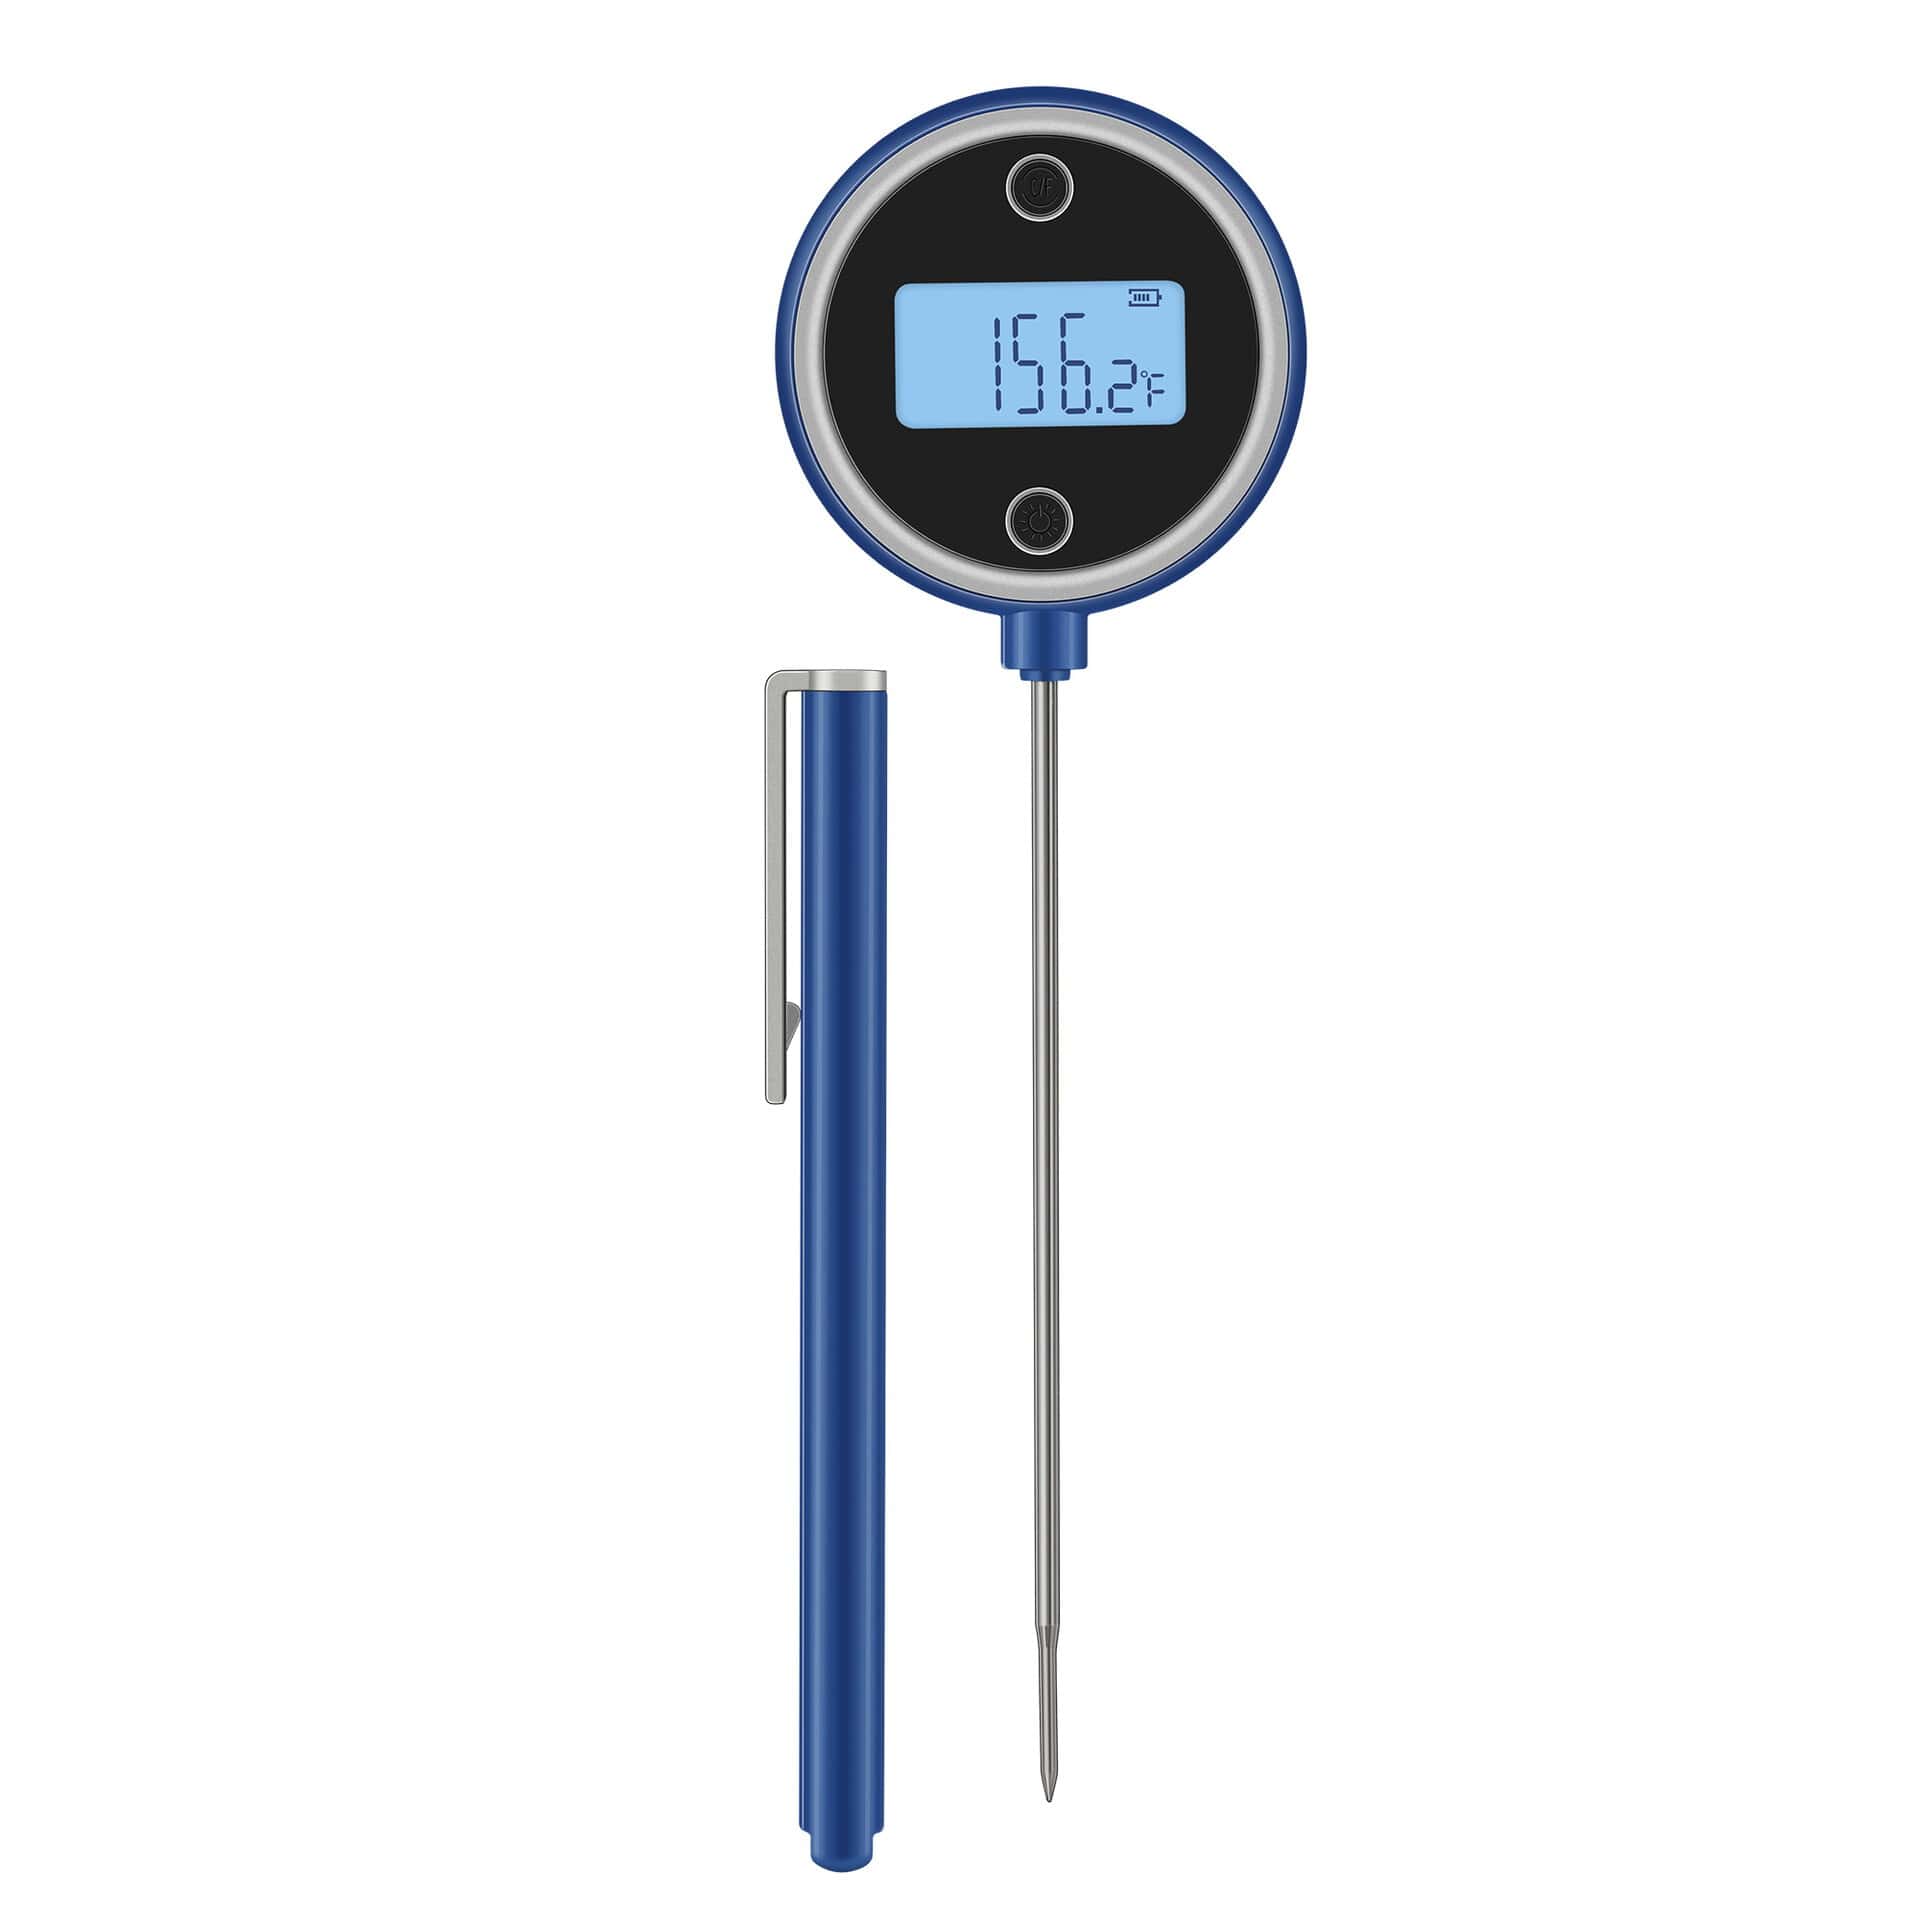 https://www.chefstemp.com/wp-content/uploads/2021/08/chefstemp-pocket-pro-cooking-thermometer-02.jpg